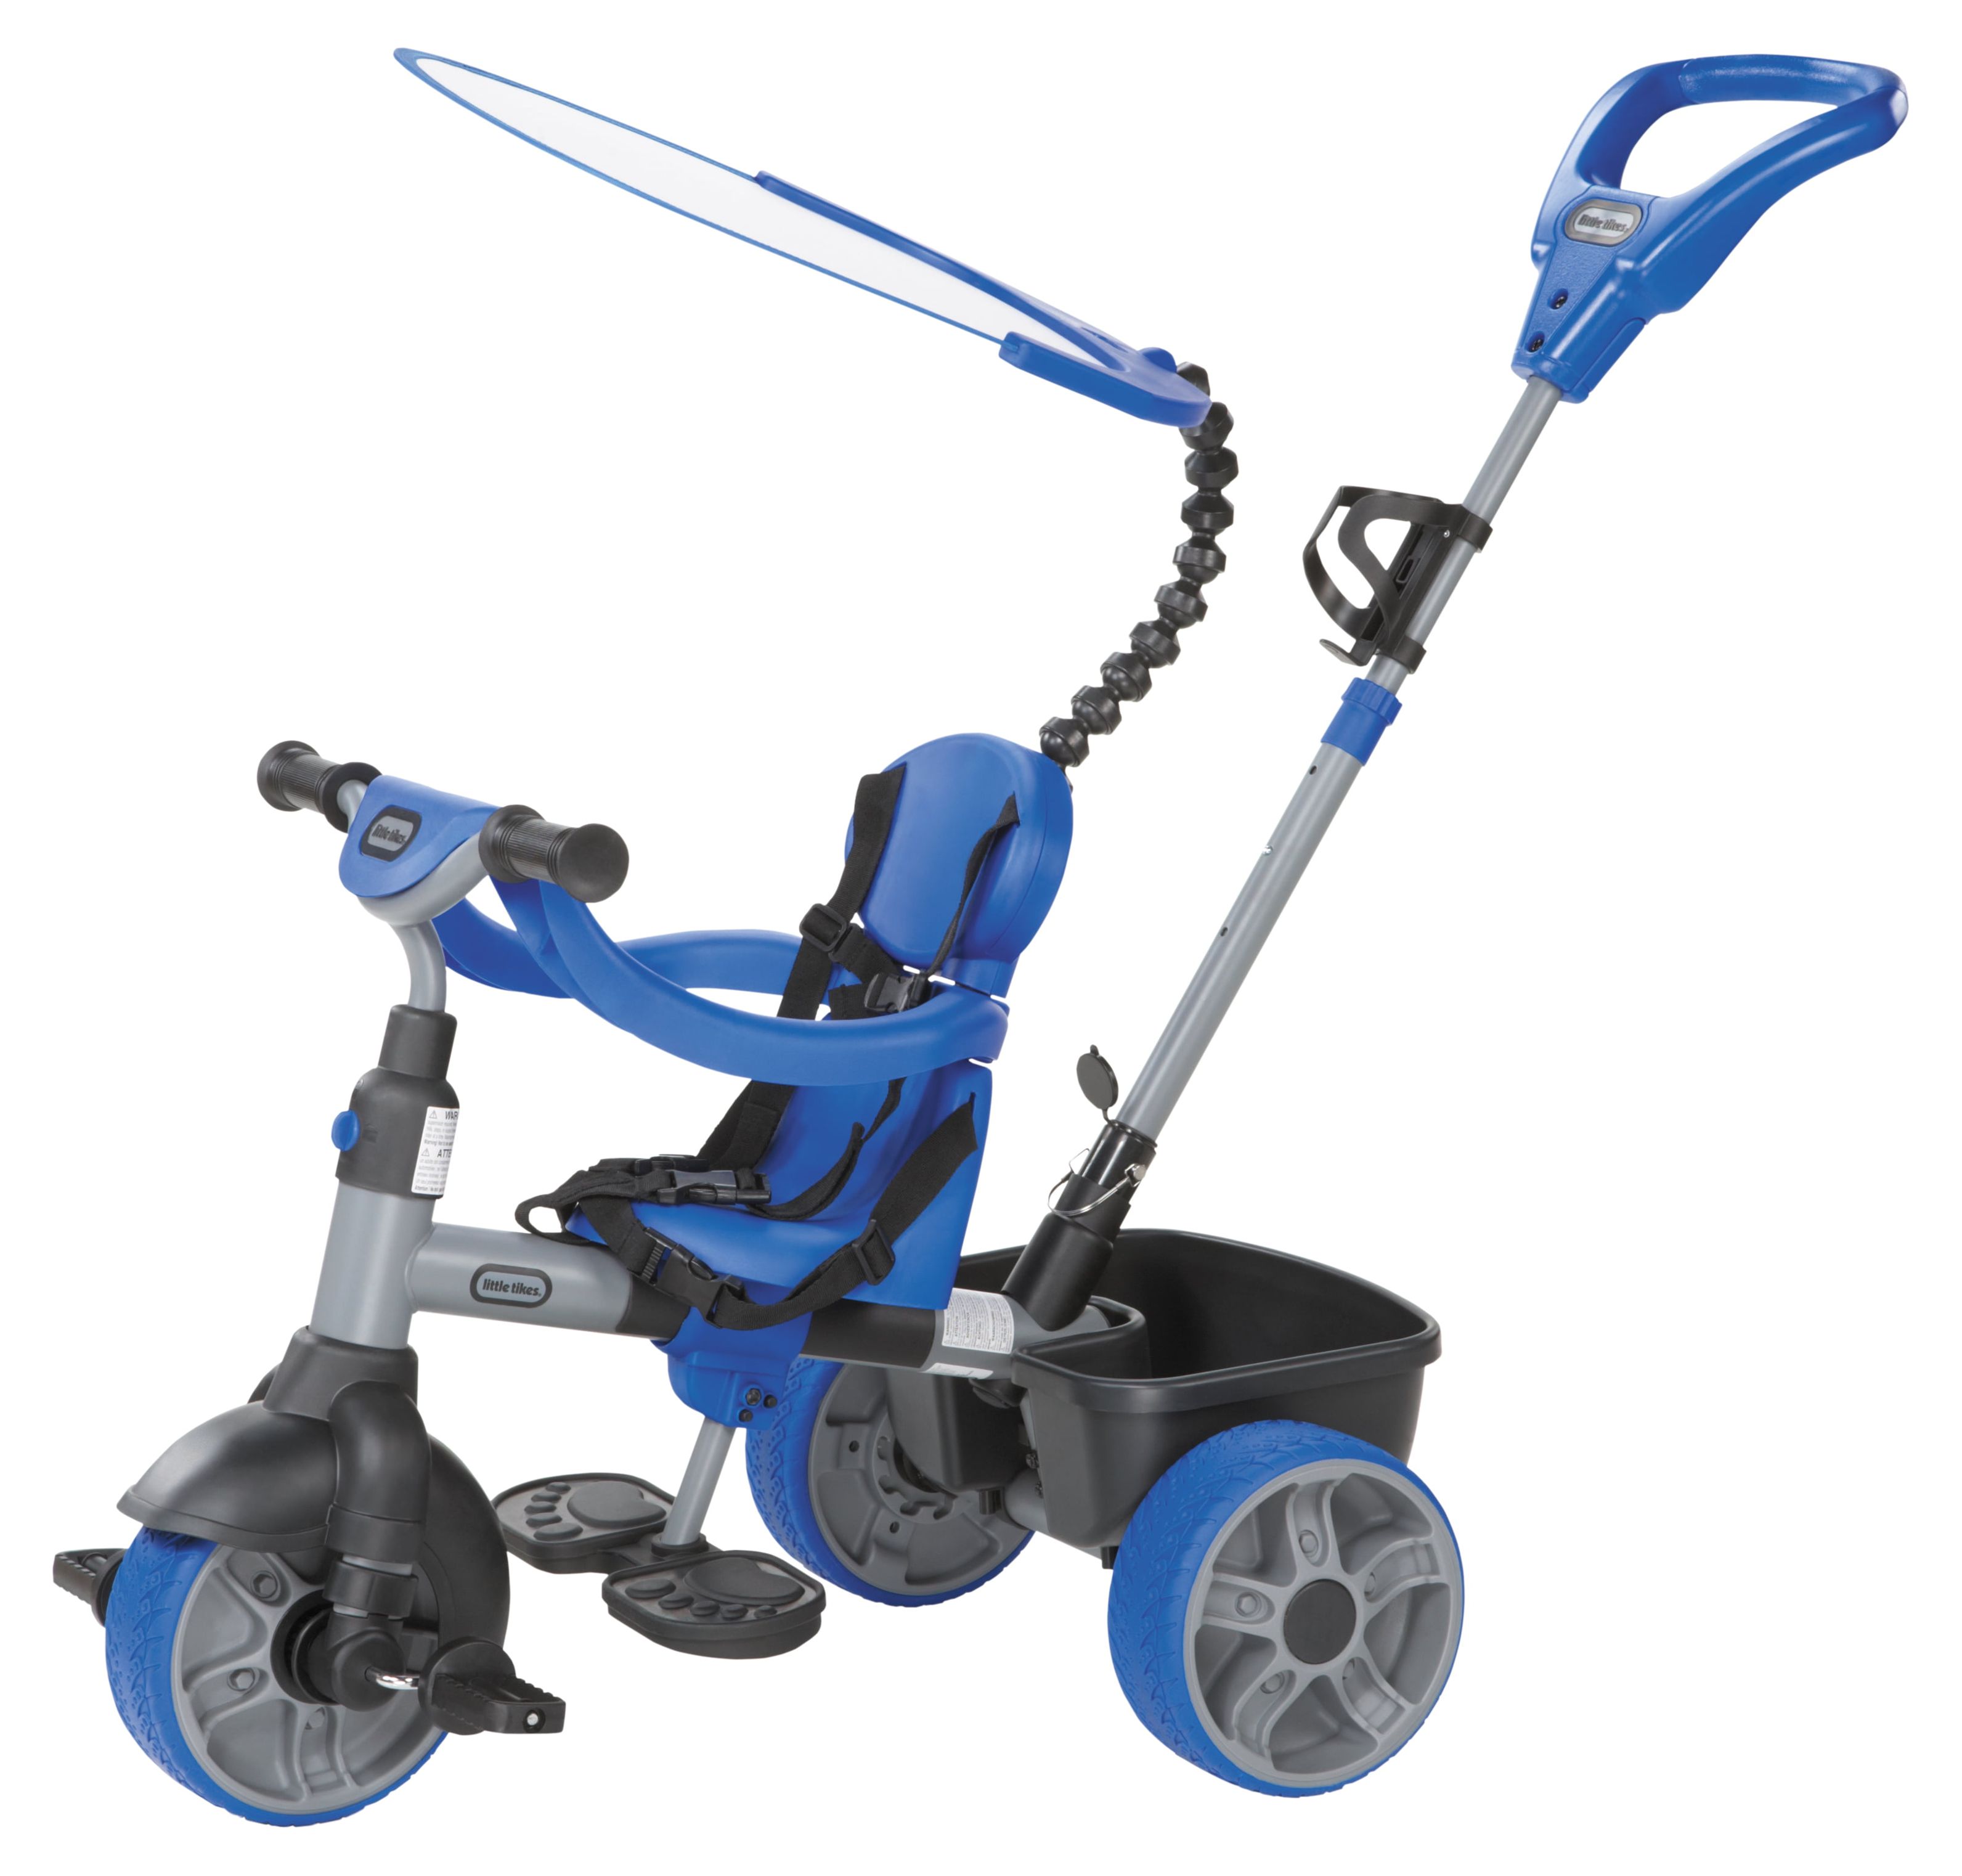 Little Tikes 4-in-1 Basic Edition Trike in Blue, Convertible Tricycle for Toddlers Tricycle with 4 Stages of Growth and Shade Canopy- For Kids Kids Boys Girls Ages 9 Months to 3 Years Old - image 1 of 8